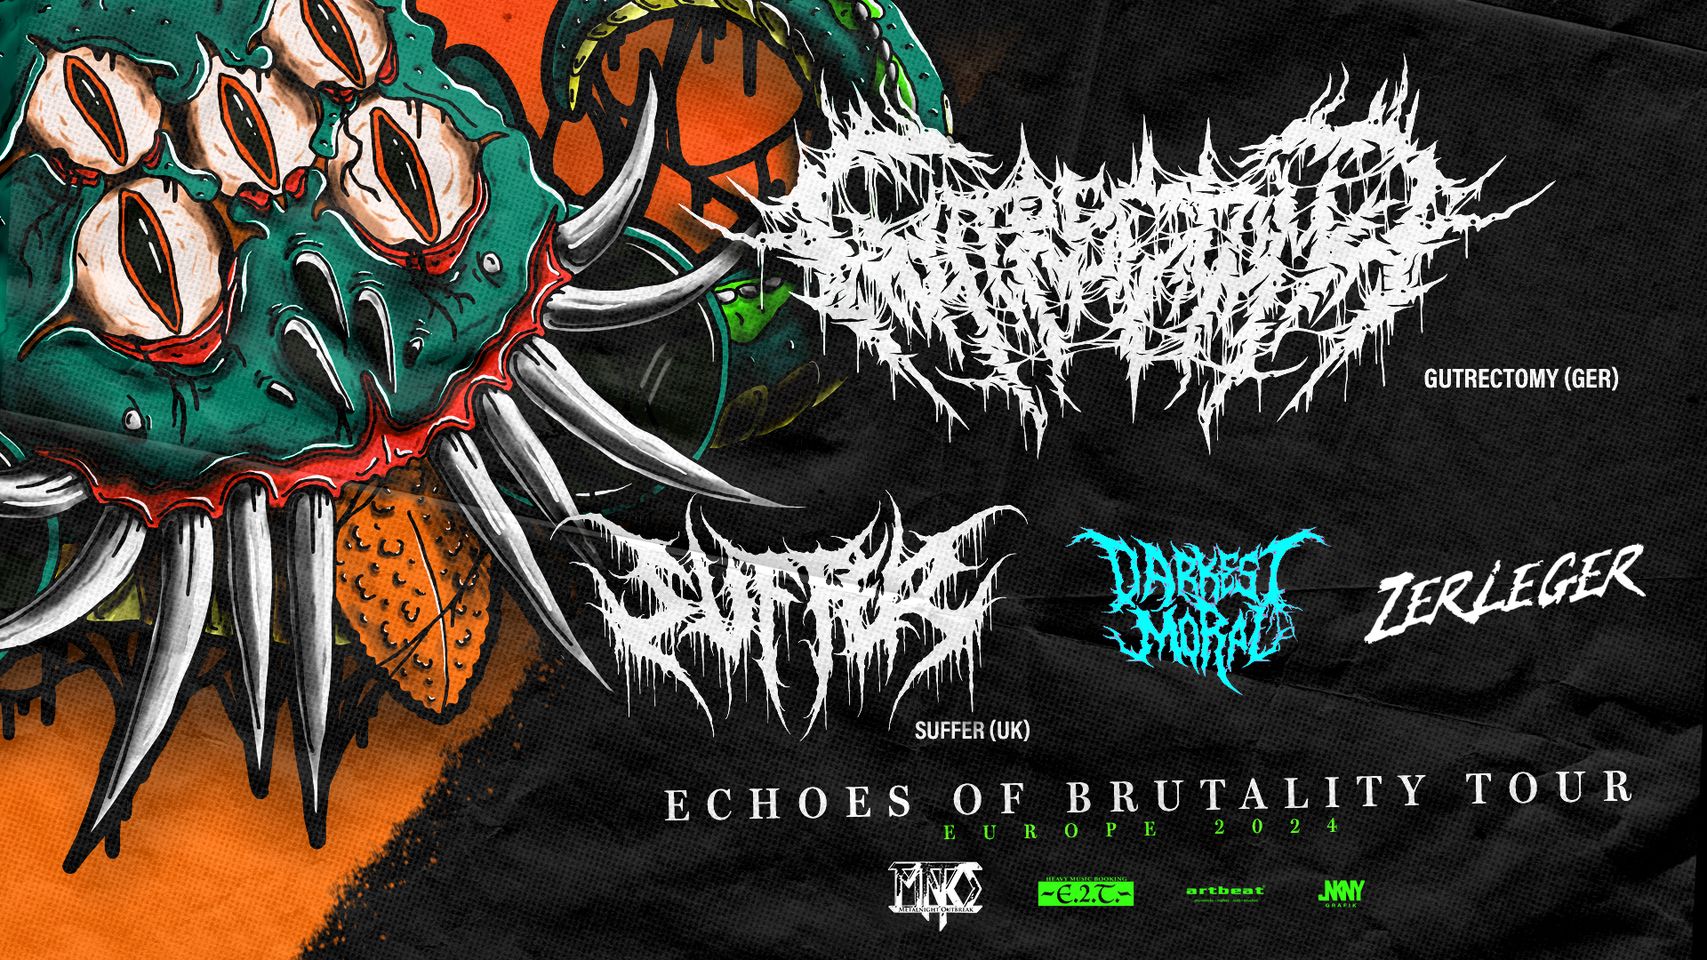 Echoes of Brutality Tour 2024 am 24. January 2024 @ Viper Room.